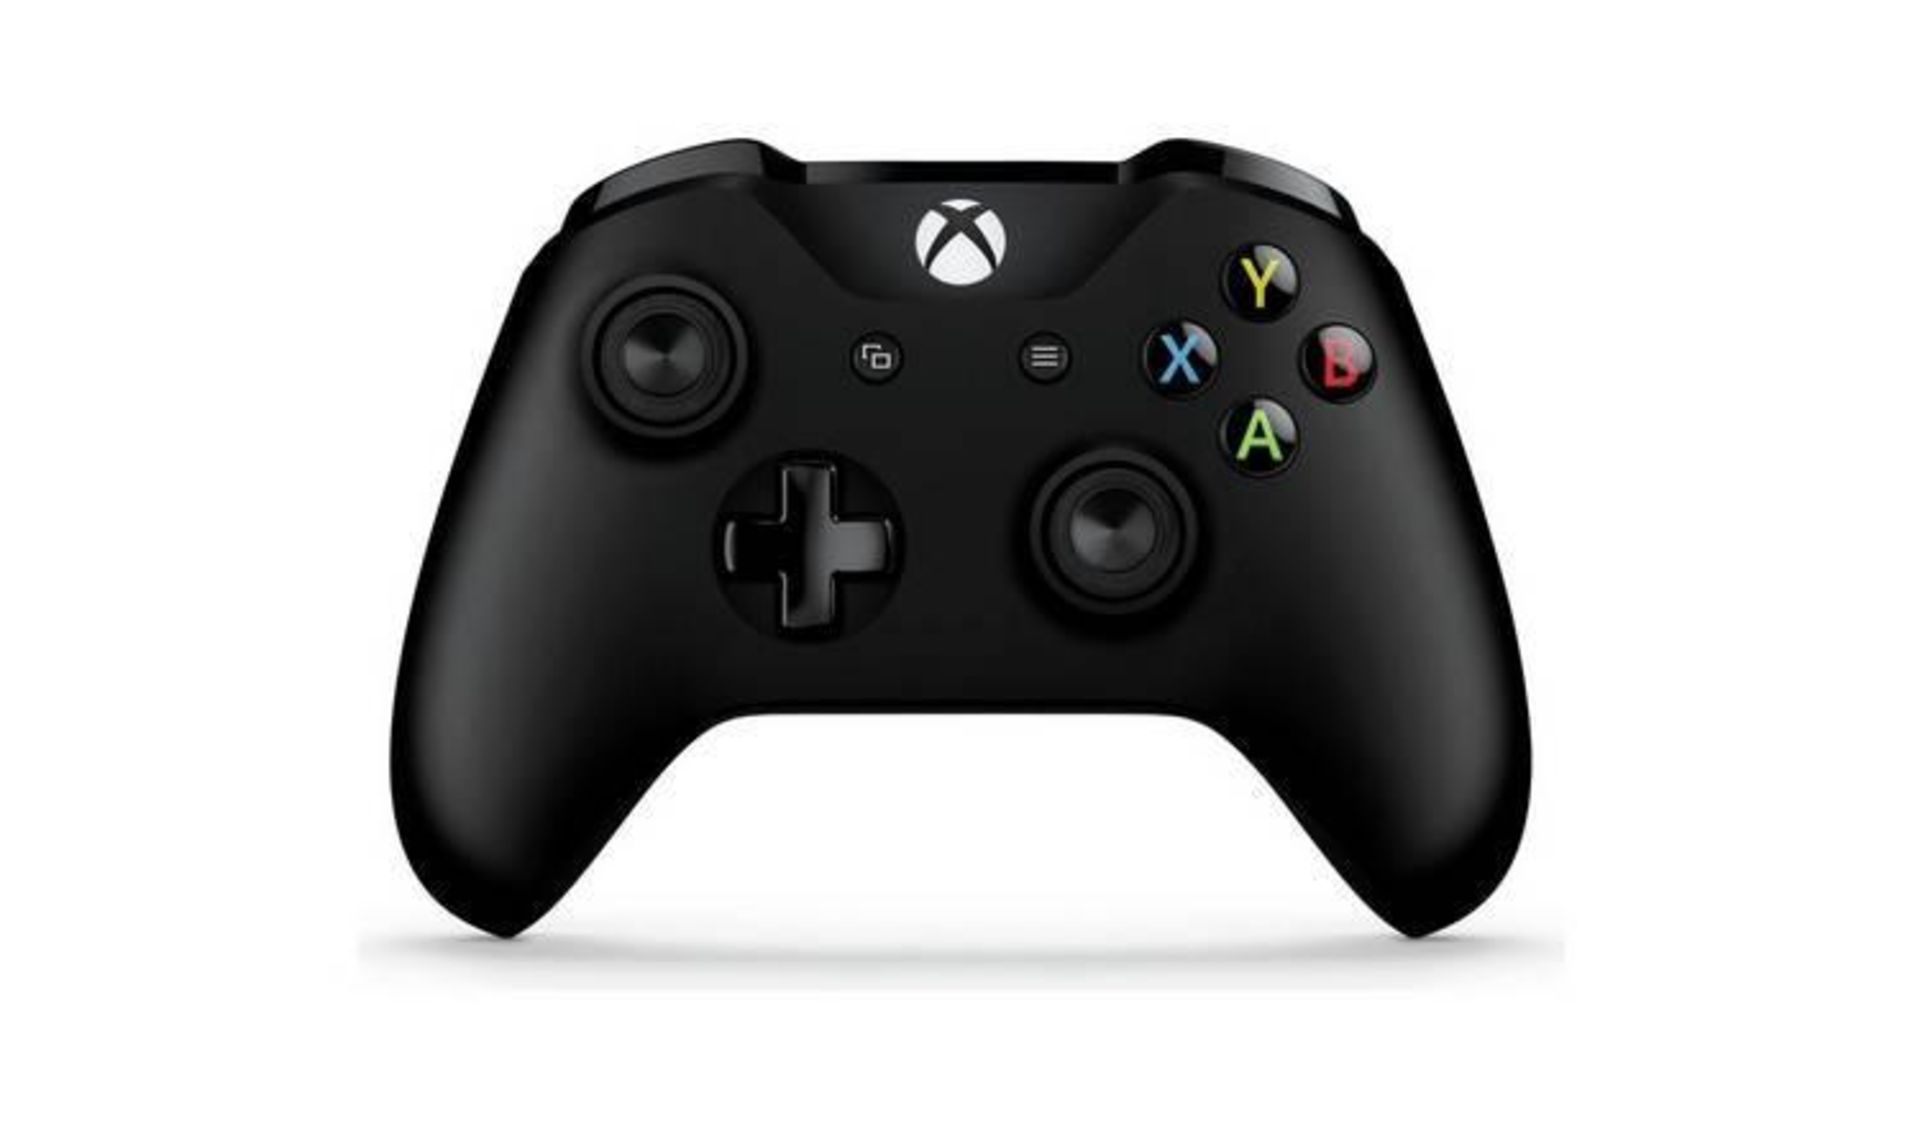 Official Xbox One Wireless Controller 3.5mm - Black (619/9582) - £49.99 RRP